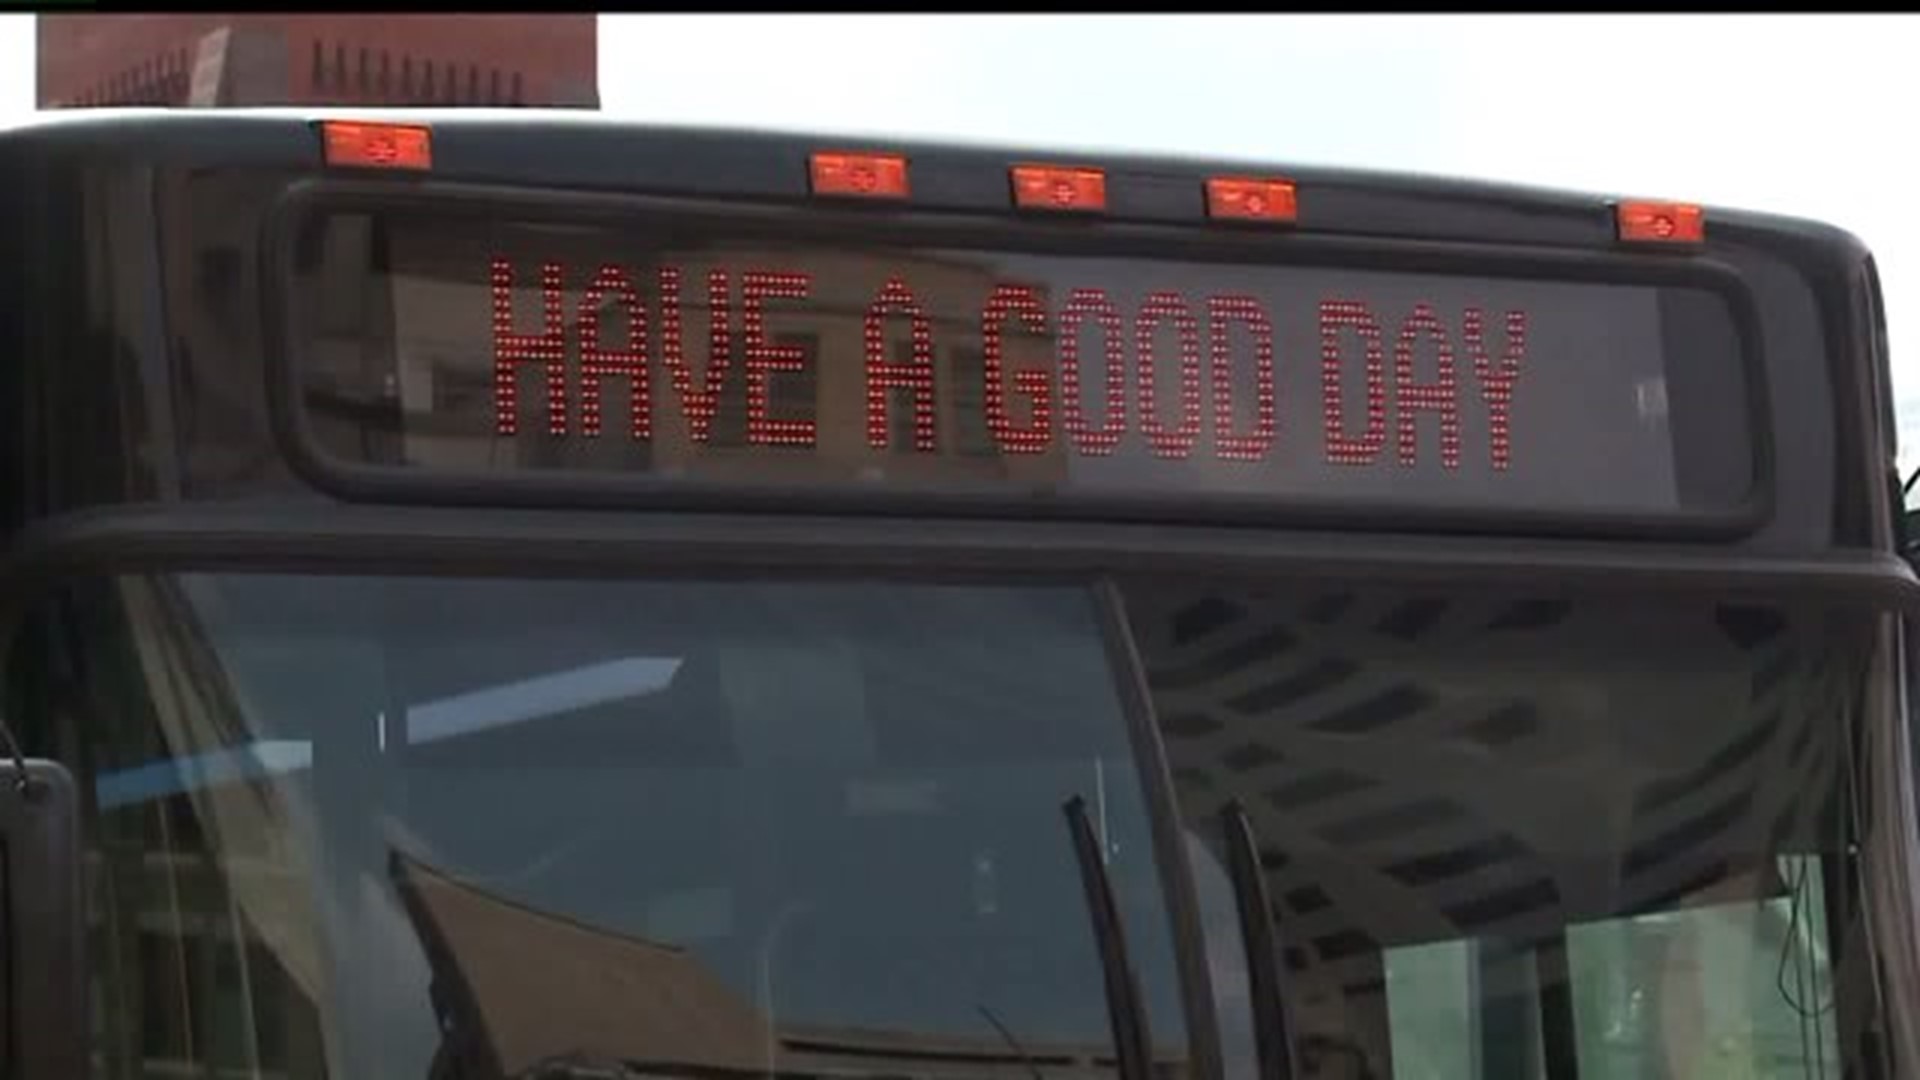 PennDOT`s regional transit would save millions, cost jobs